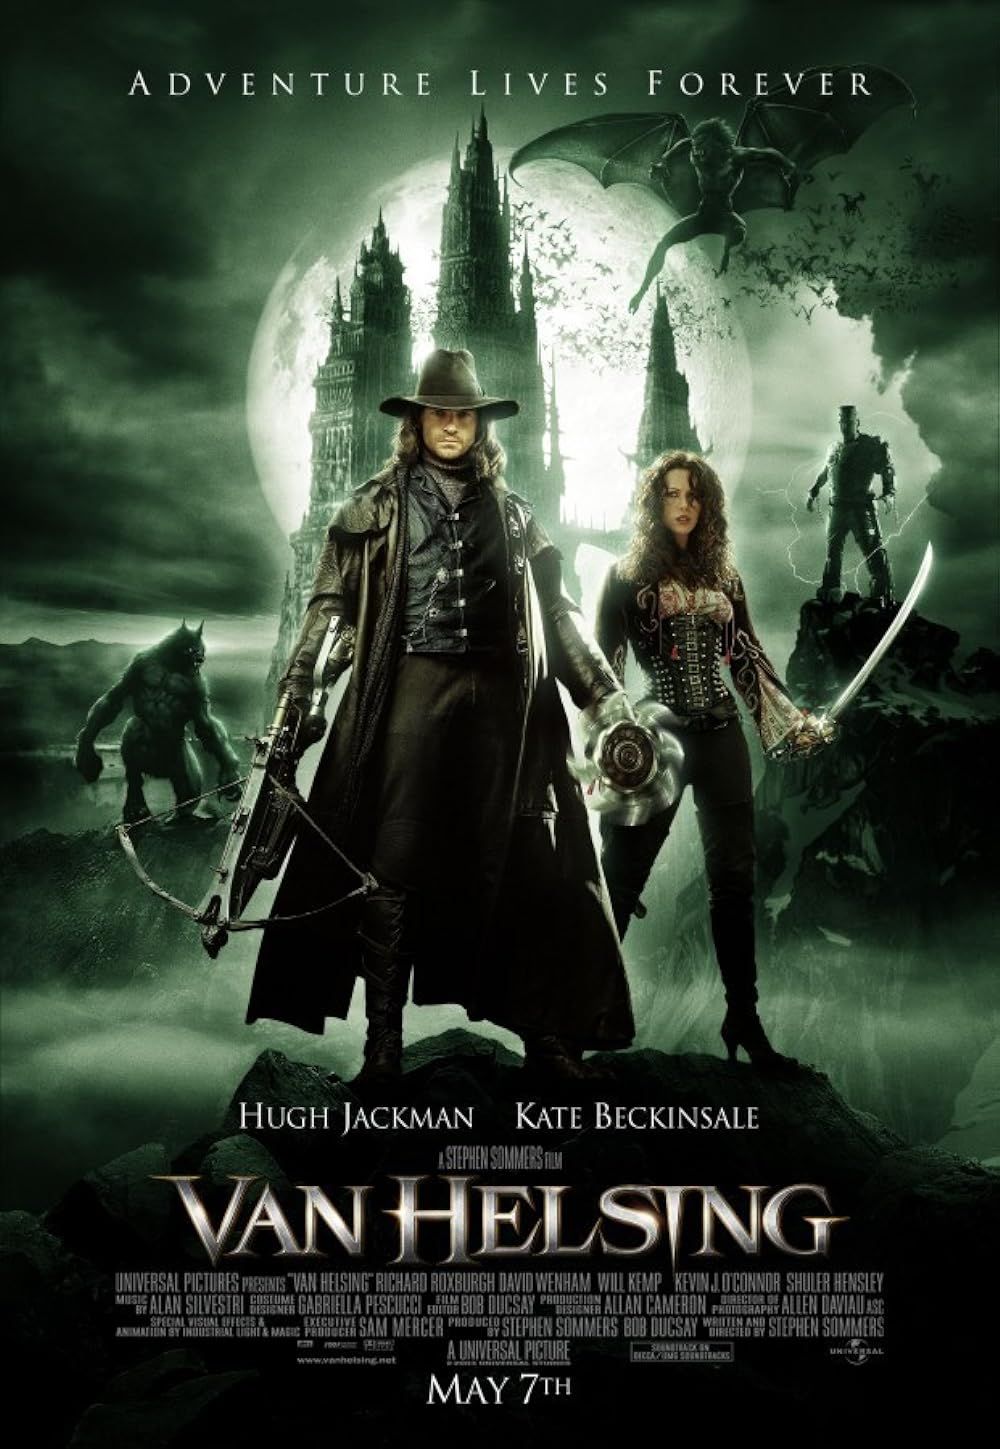 The Cast on the Van Helsing Poster